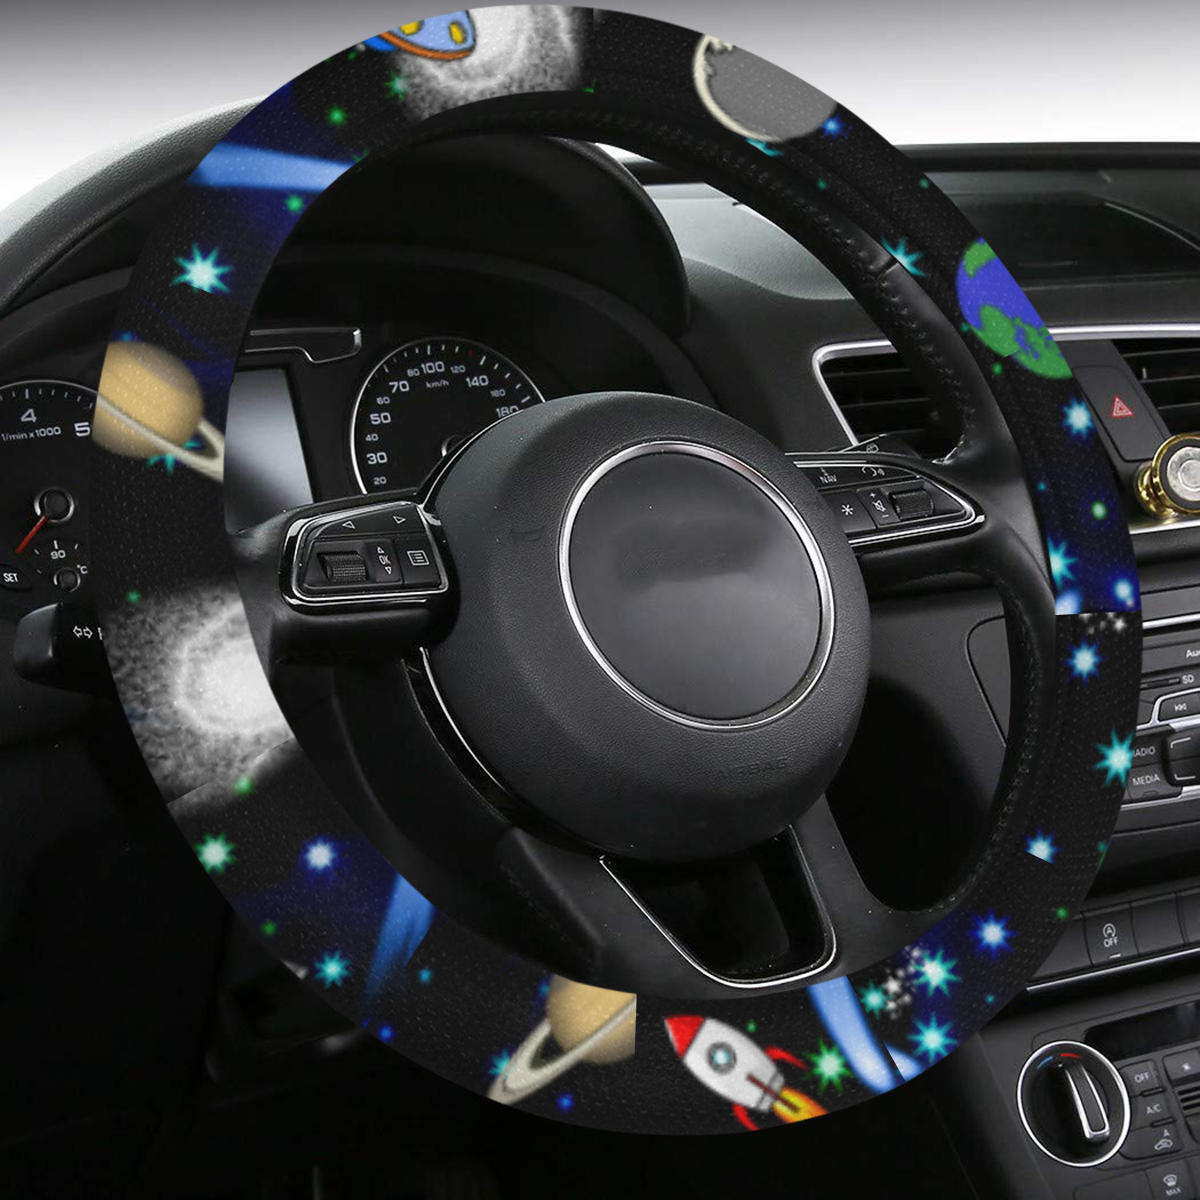 Galaxy Universe - Planets,Stars,Comets,Rockets Steering Wheel Cover with Anti-Slip Insert